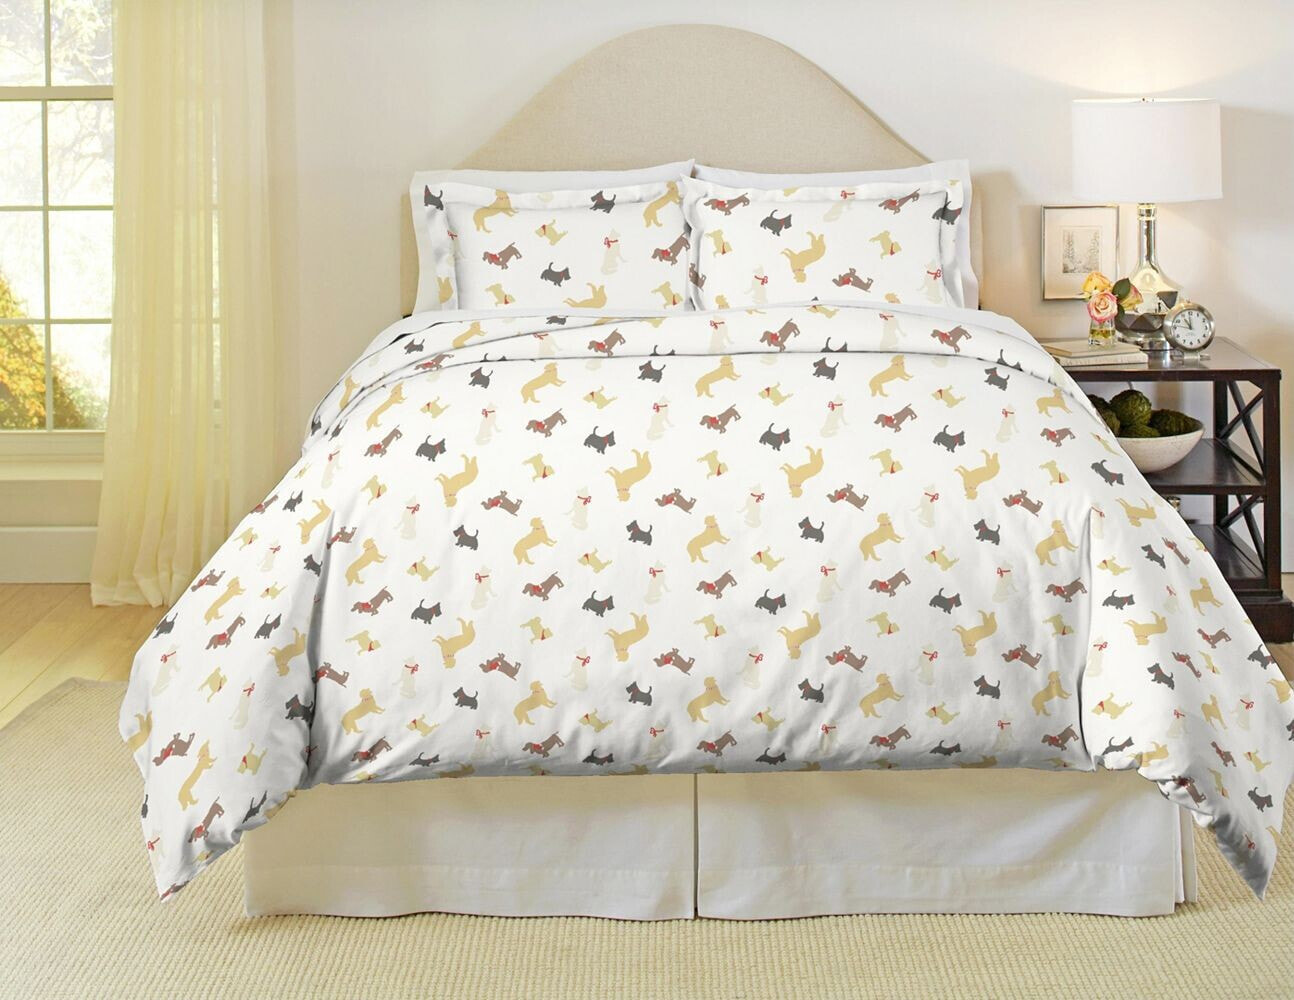 Pointehaven winter Dogs Print Heavy Weight Cotton Flannel Duvet Cover Set, Twin/Twin XL